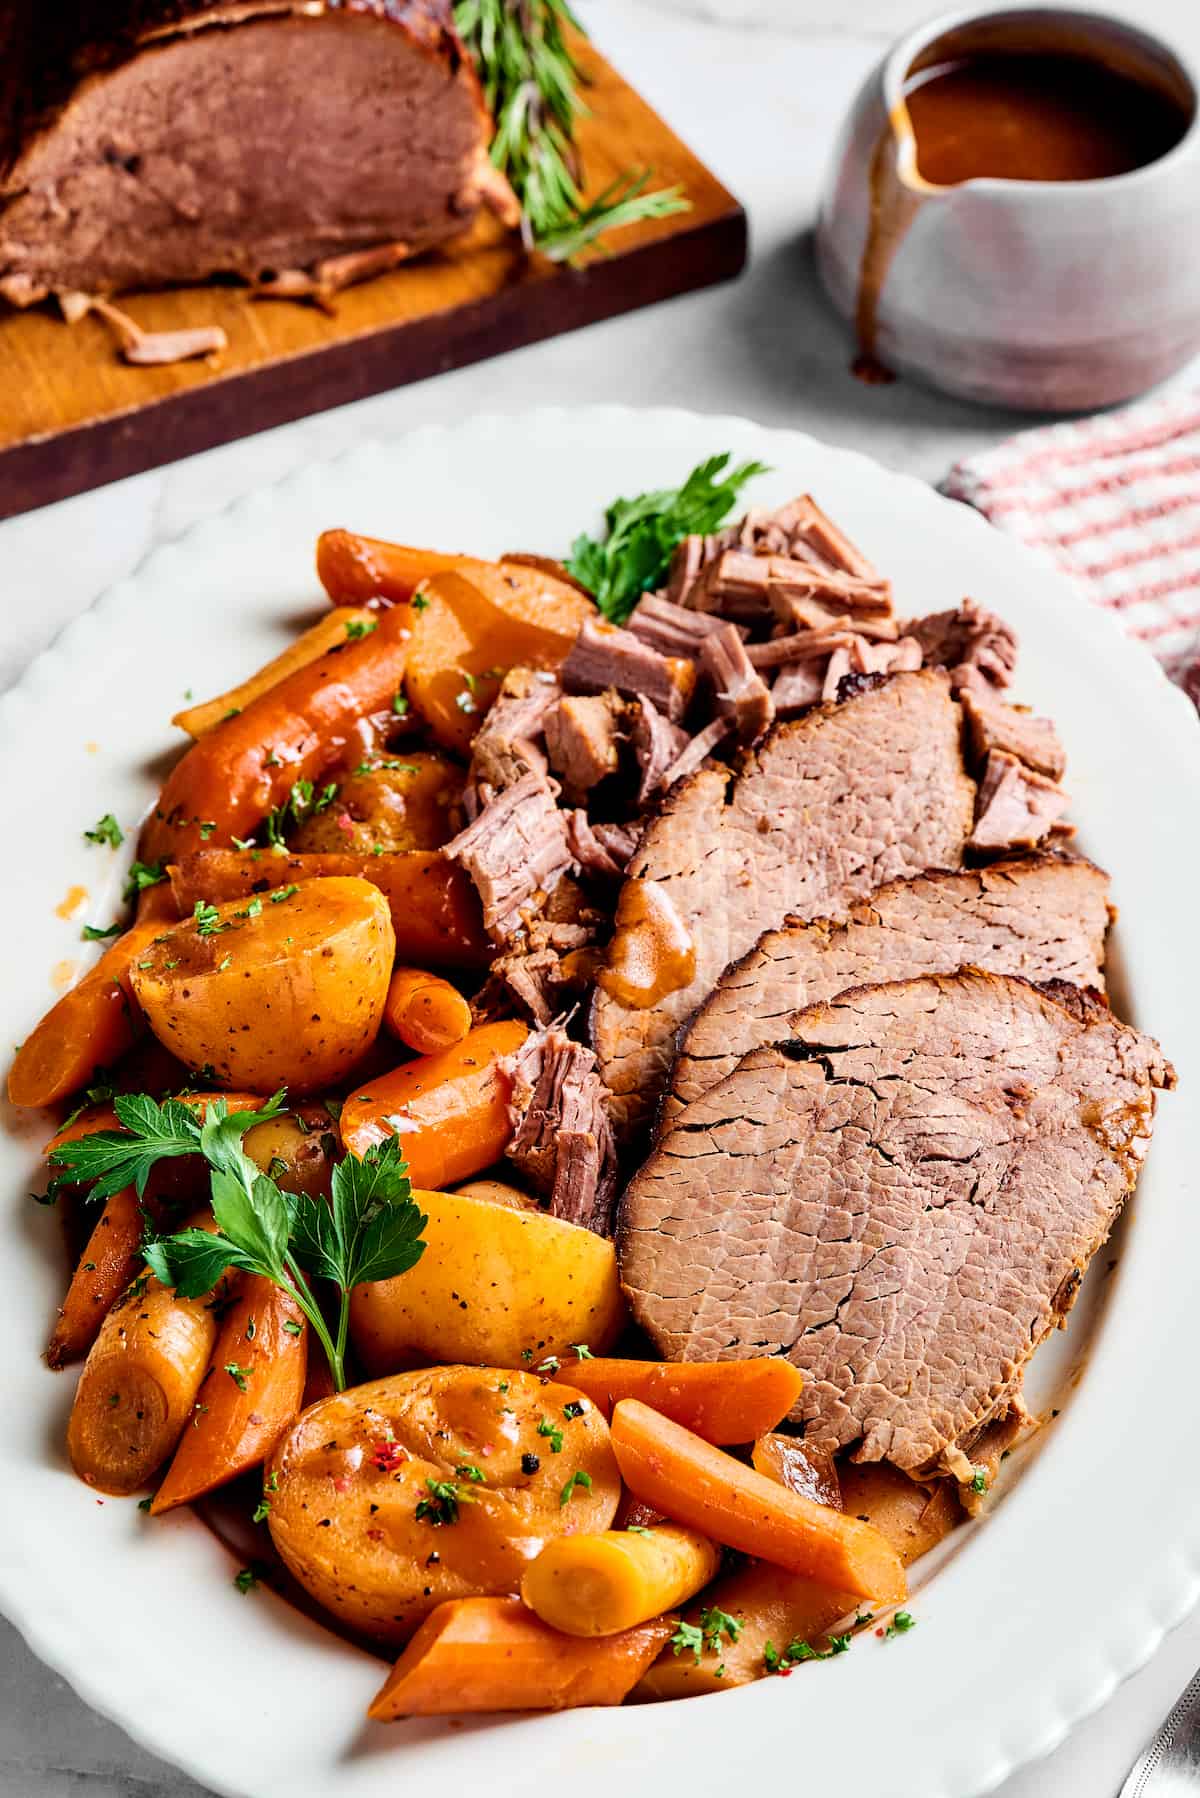 A platter of pot roast with vegetables next to a carving board with roast beef, and a pitcher of gravy.